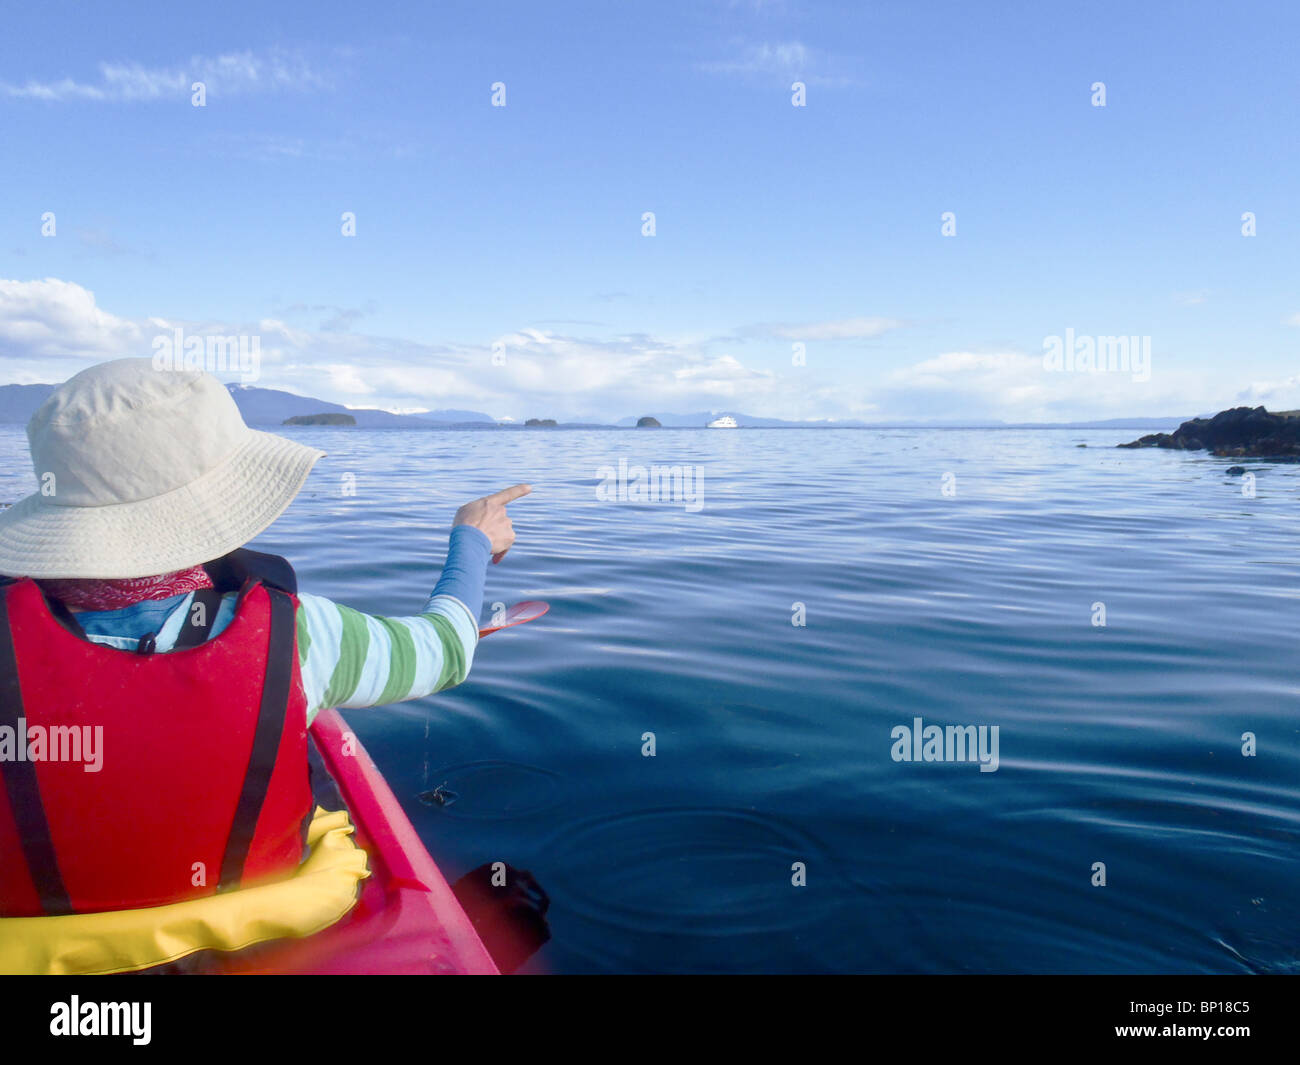 A cool kayaking experience brings this adventurer right up to an advancing glacier, paddling the Inside Passage, Alaska, USA. Stock Photo